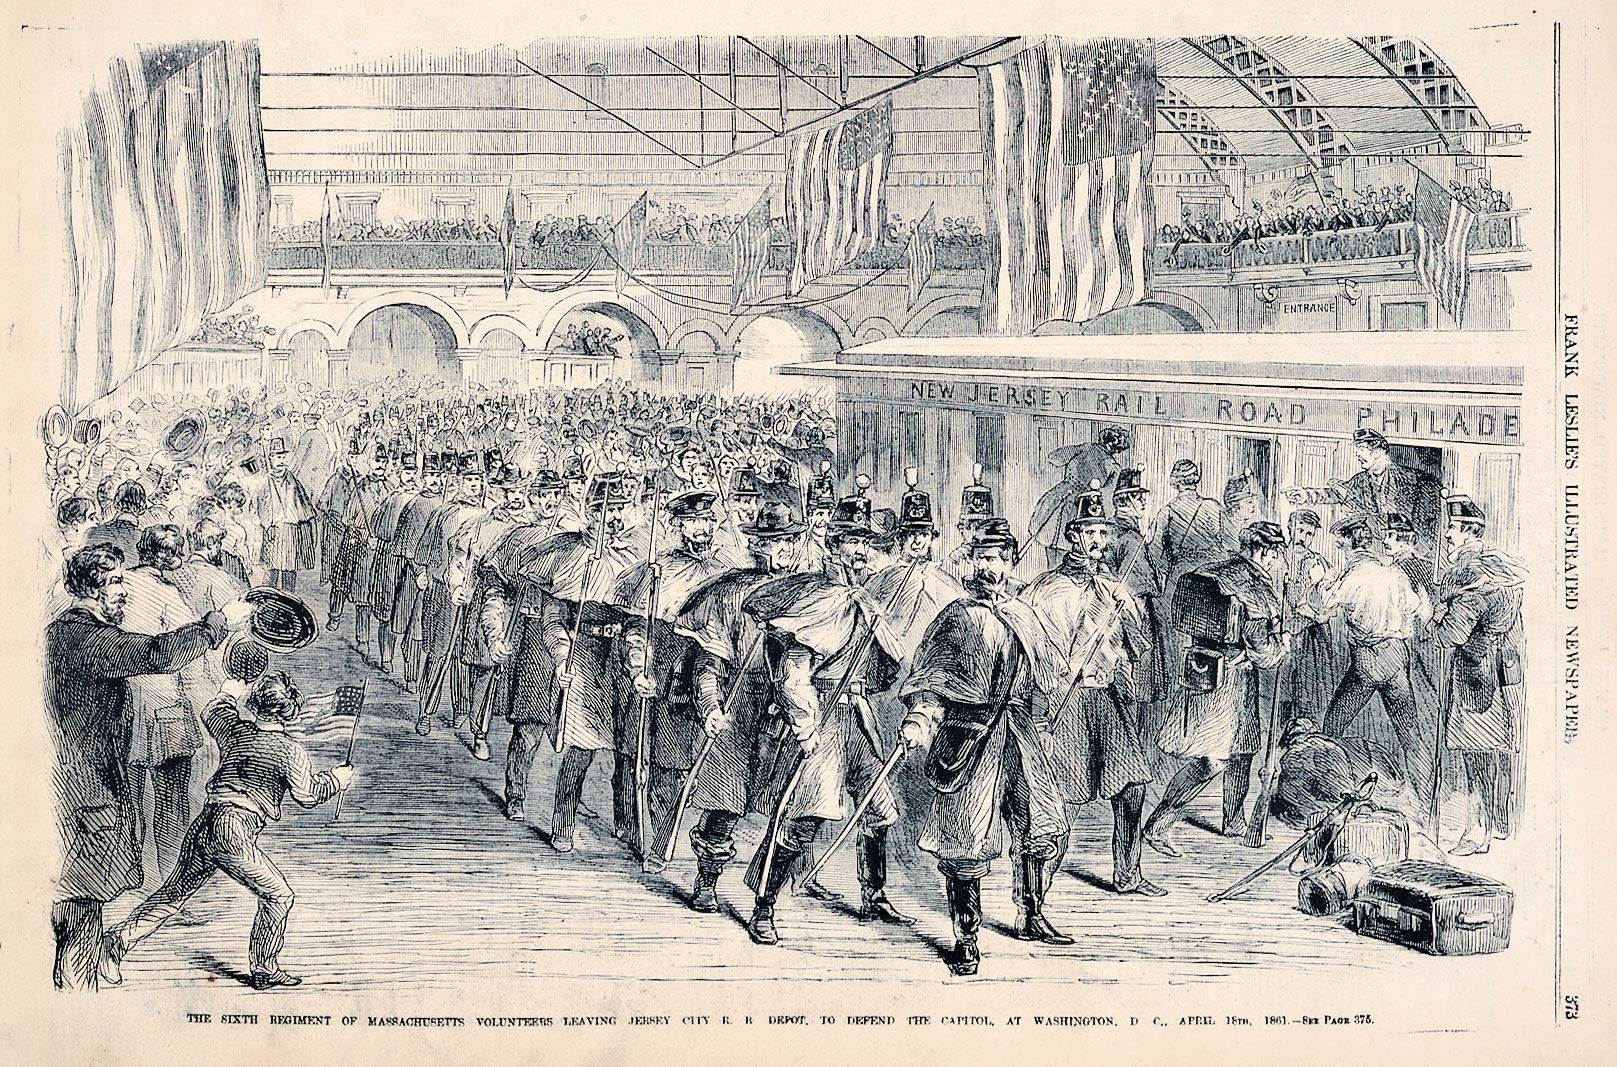 The Sixth Regiment of Massachusetts Volunteers Leaving Jersey City R. R. Depot, to Defend the Capitol, at Washington, D C. [sic],  April 18th, 1861. (Acc. No. 38.00258.001)